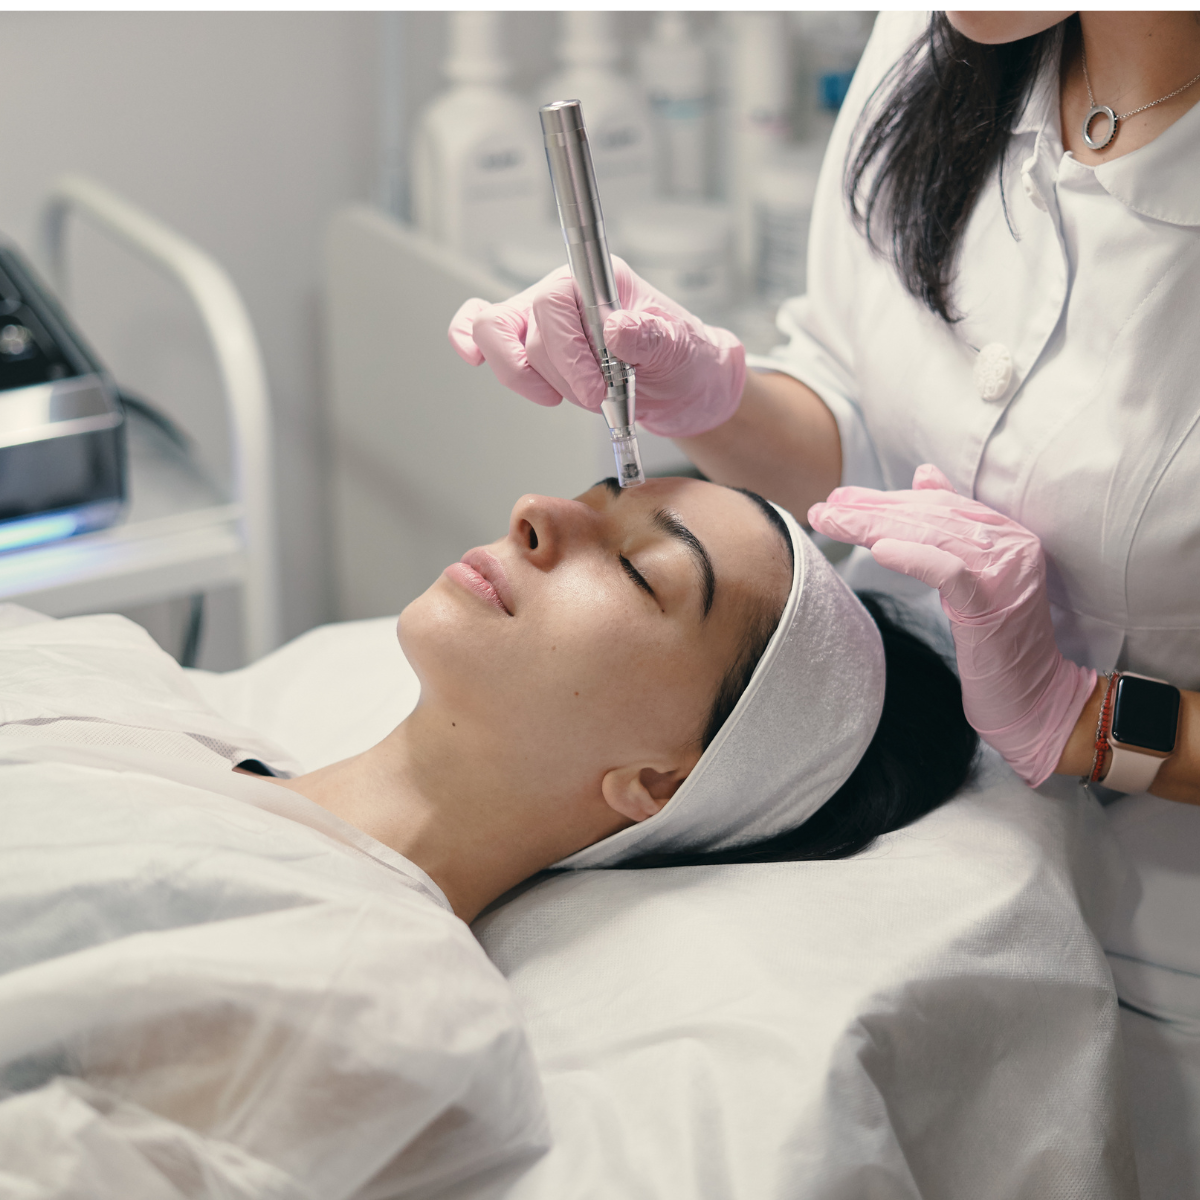 Know more about microneedling